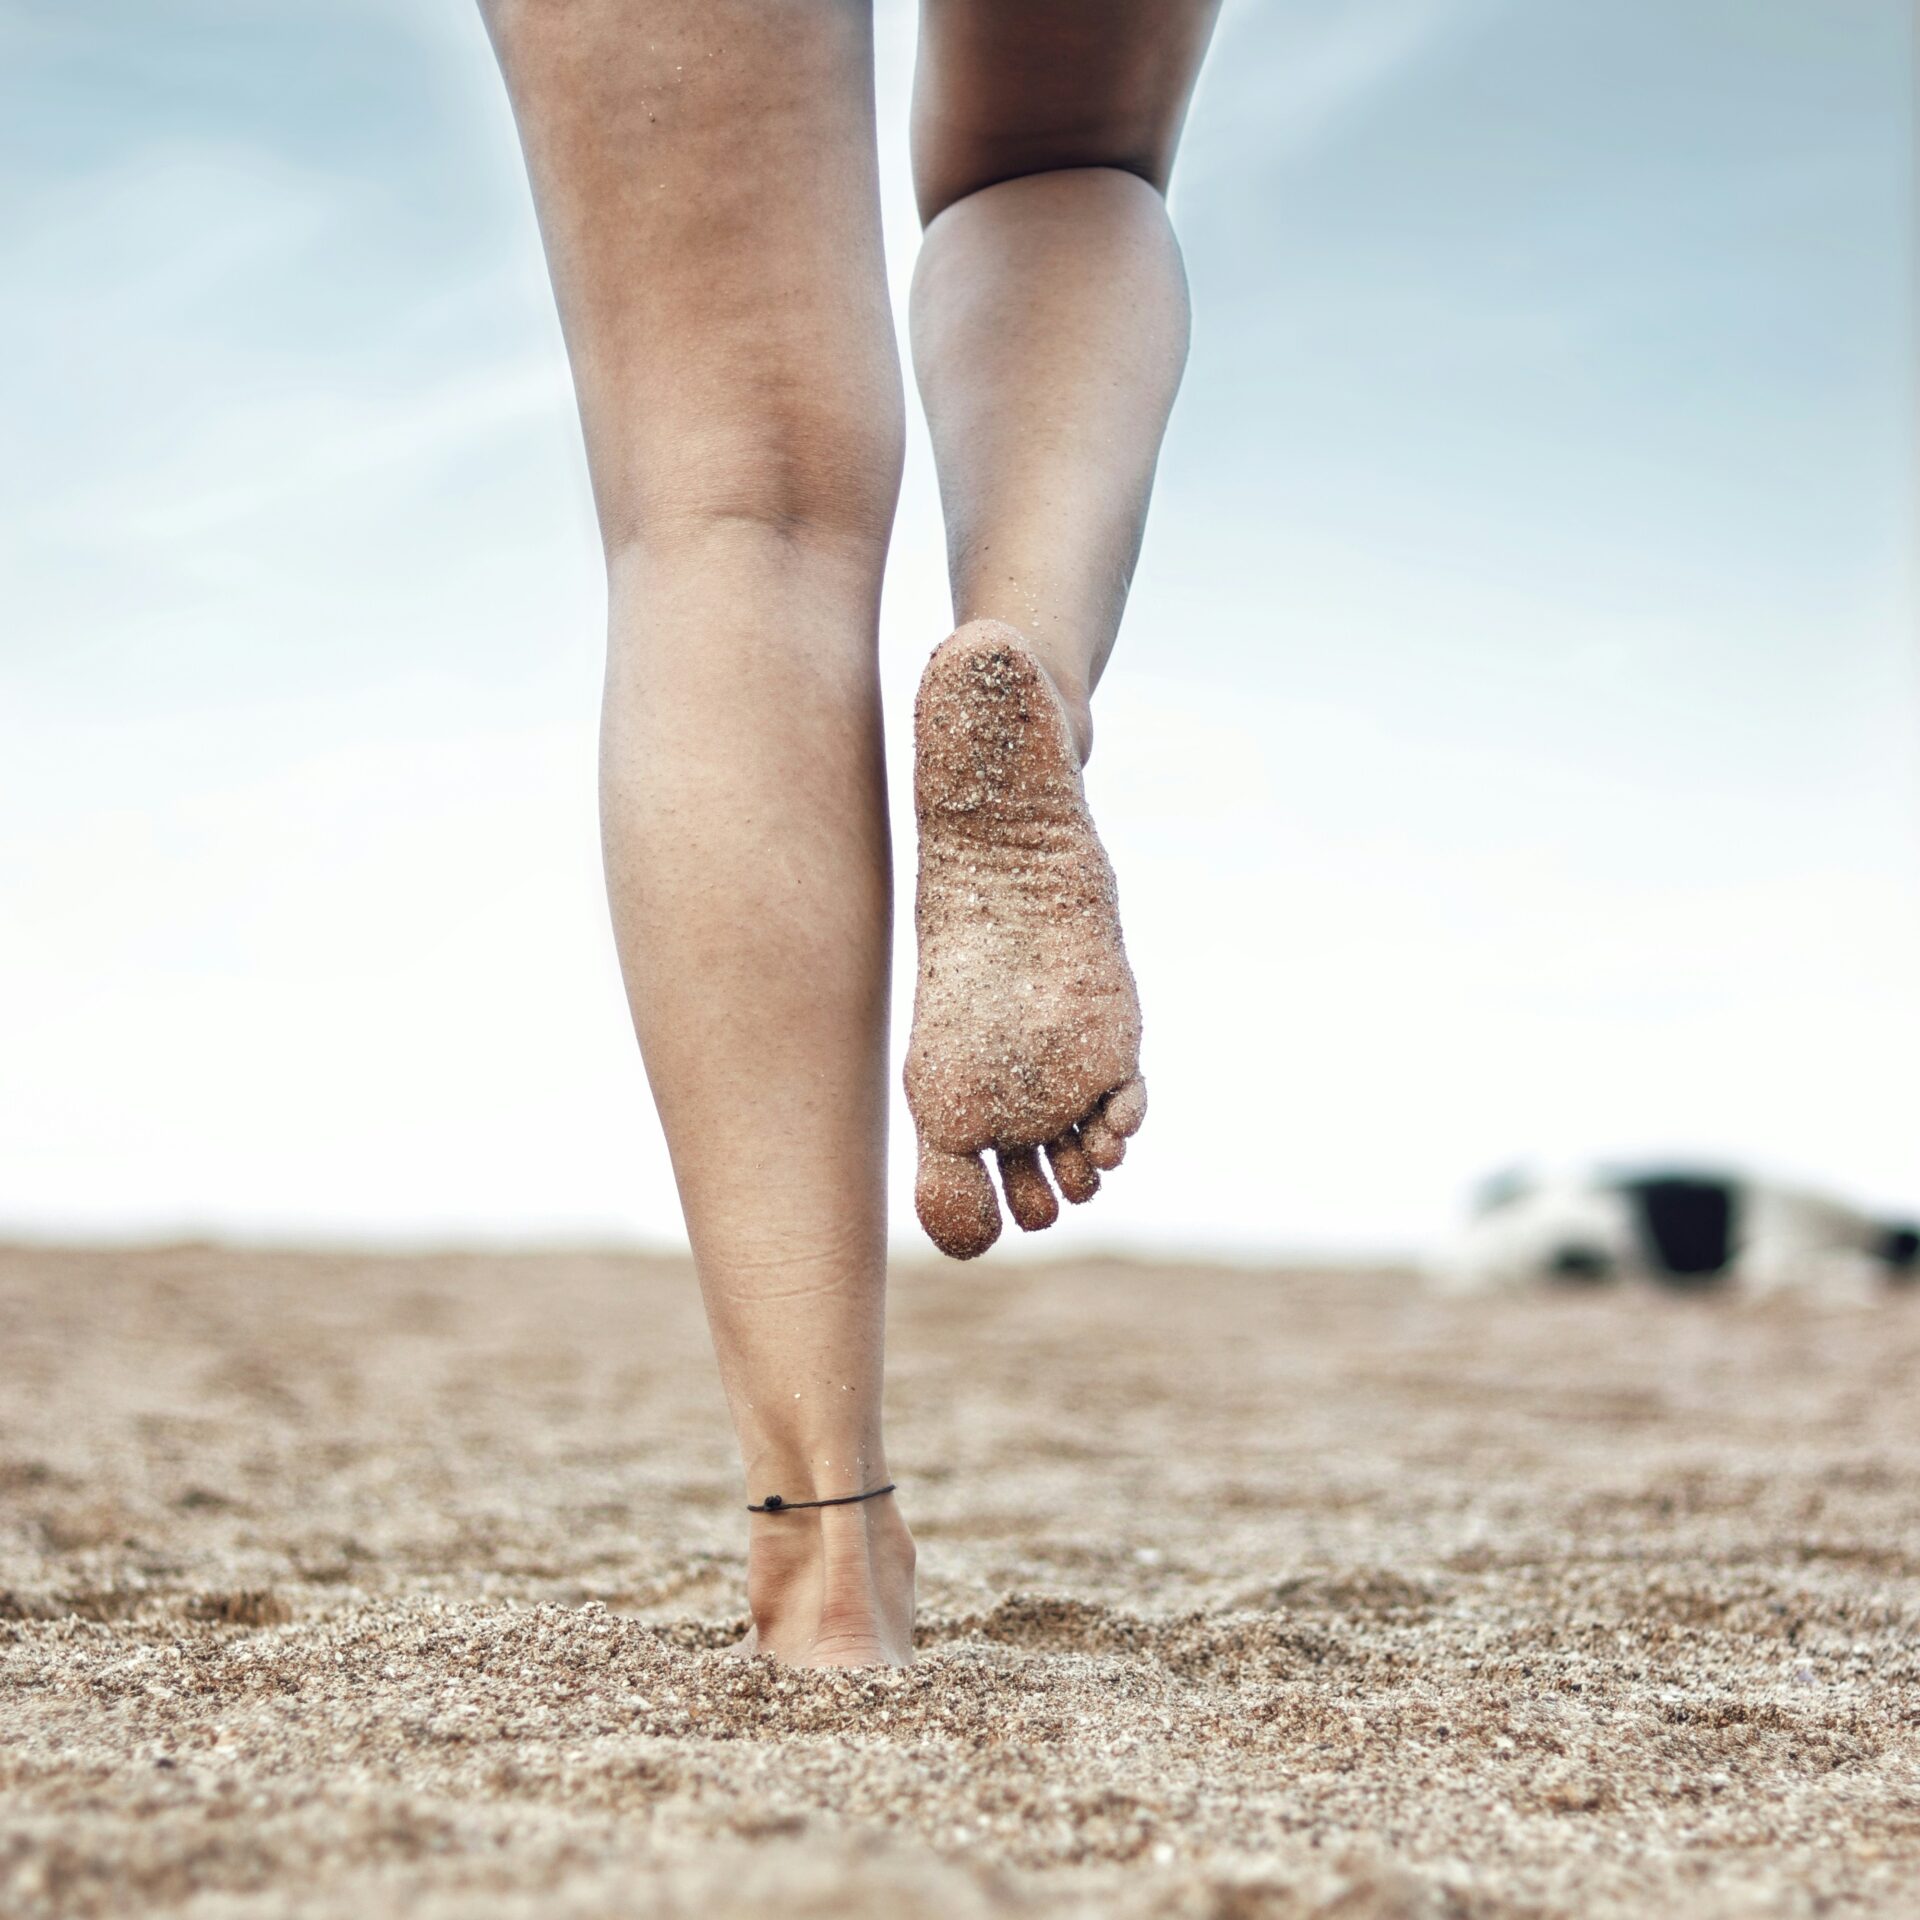 Person walking on sand. Bottom of foot and heel visible.